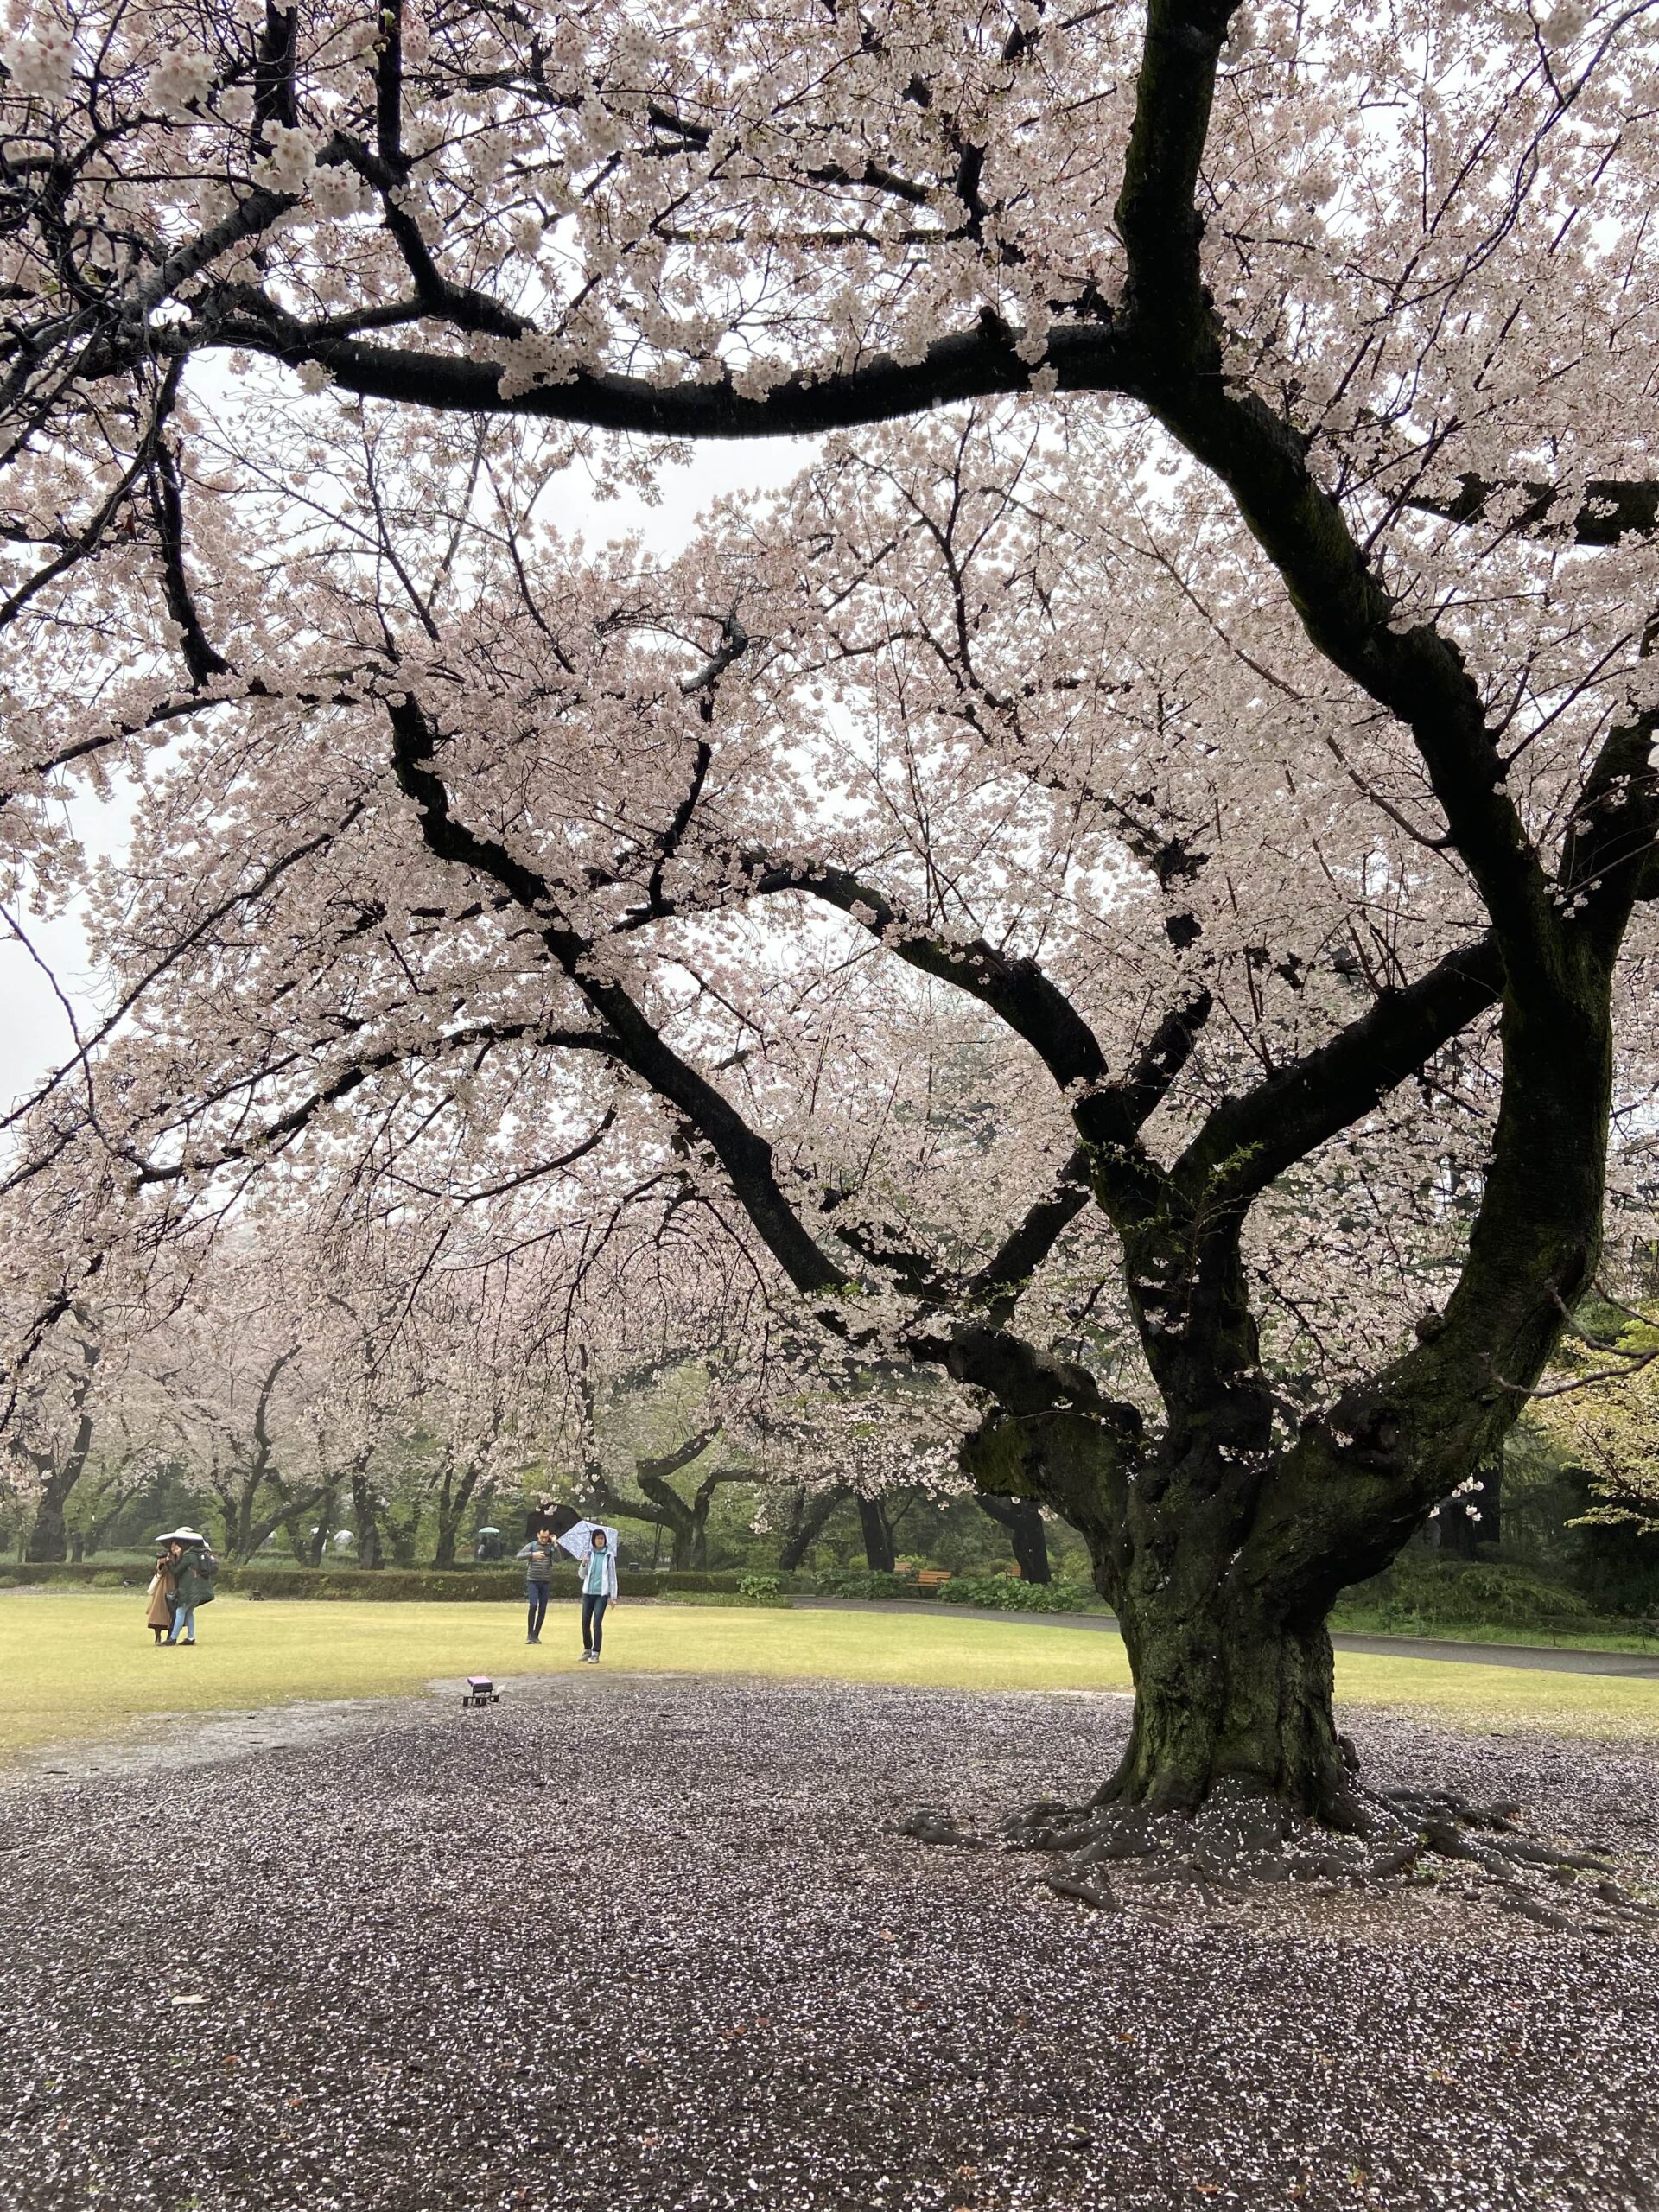 Shinjuku Gyoen National Garden cherry blossoms peak what time of year march april tokyo japan best places to see the cherry blossoms hanami